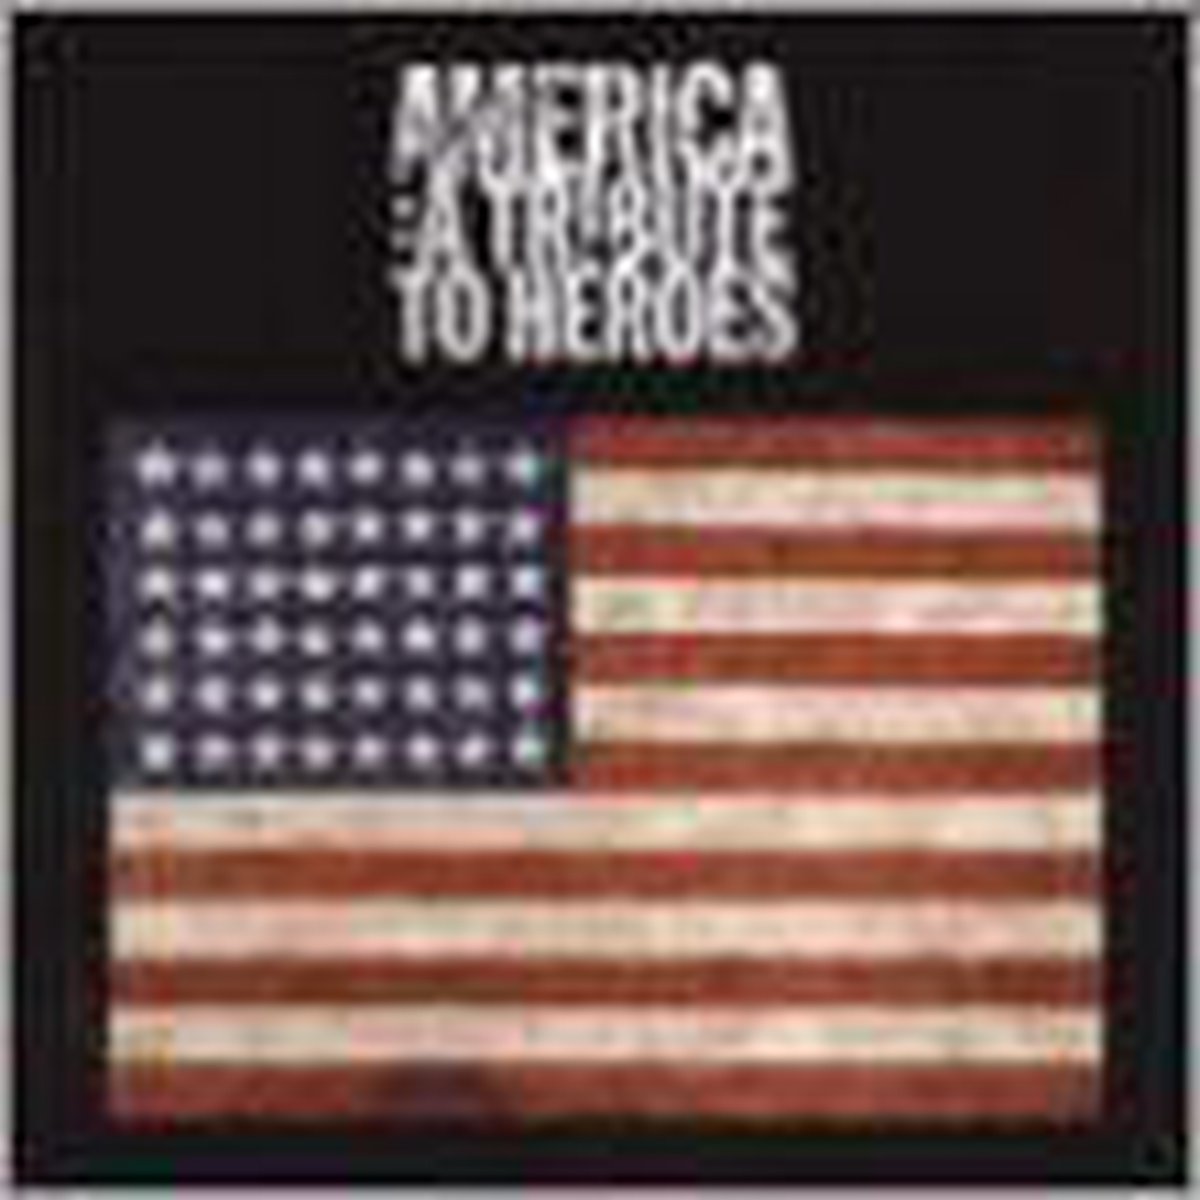 America: A Tribute To Heroes - various artists